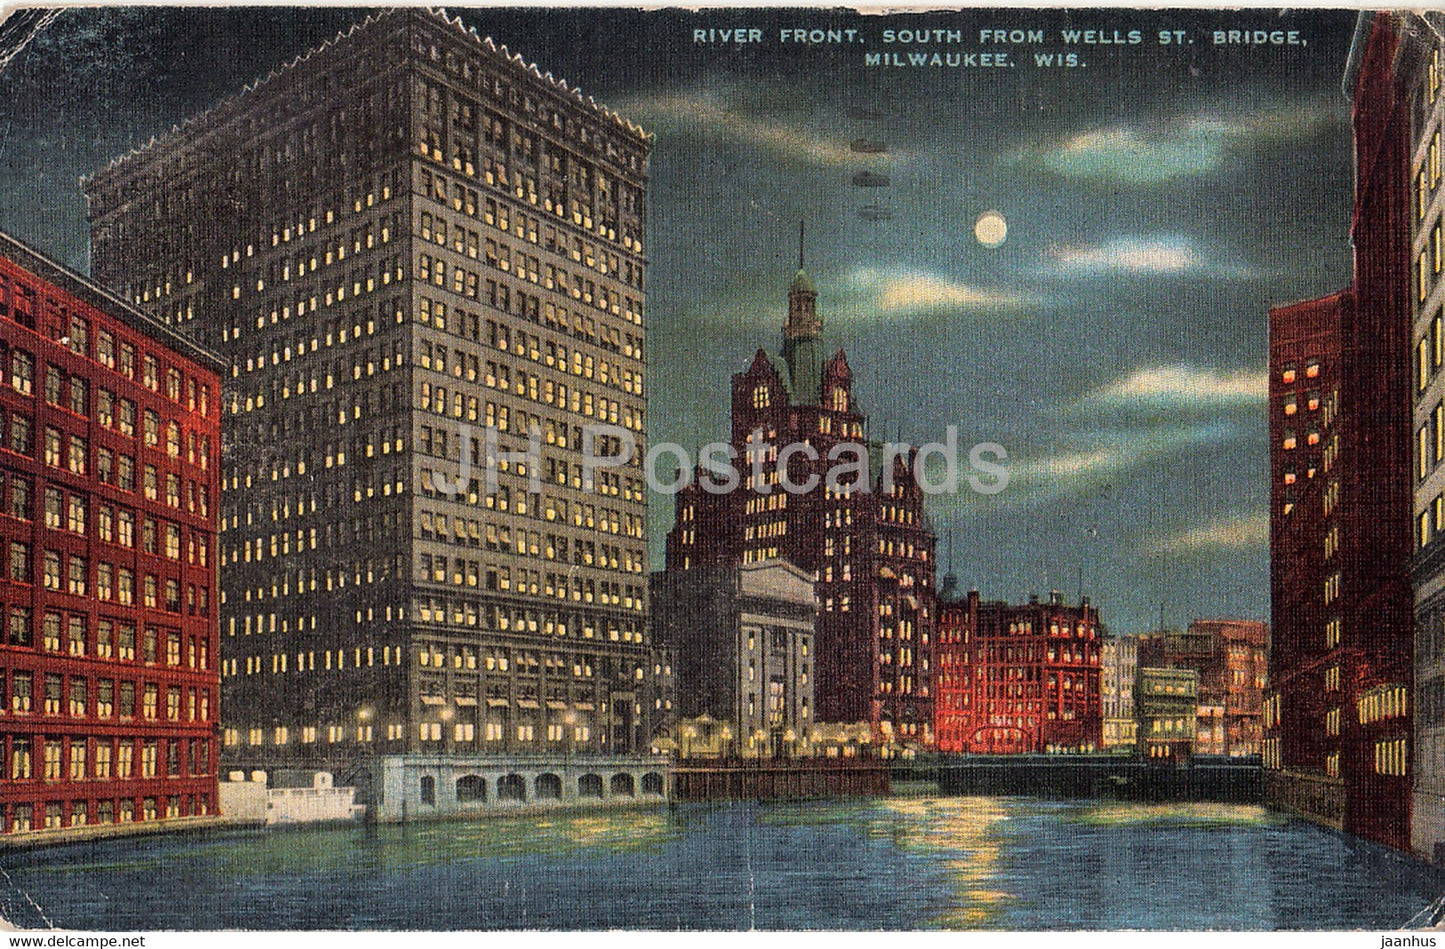 Milwaukee - River Front - South from Wells St Bridge - old postcard - 1953 - USA - used - JH Postcards